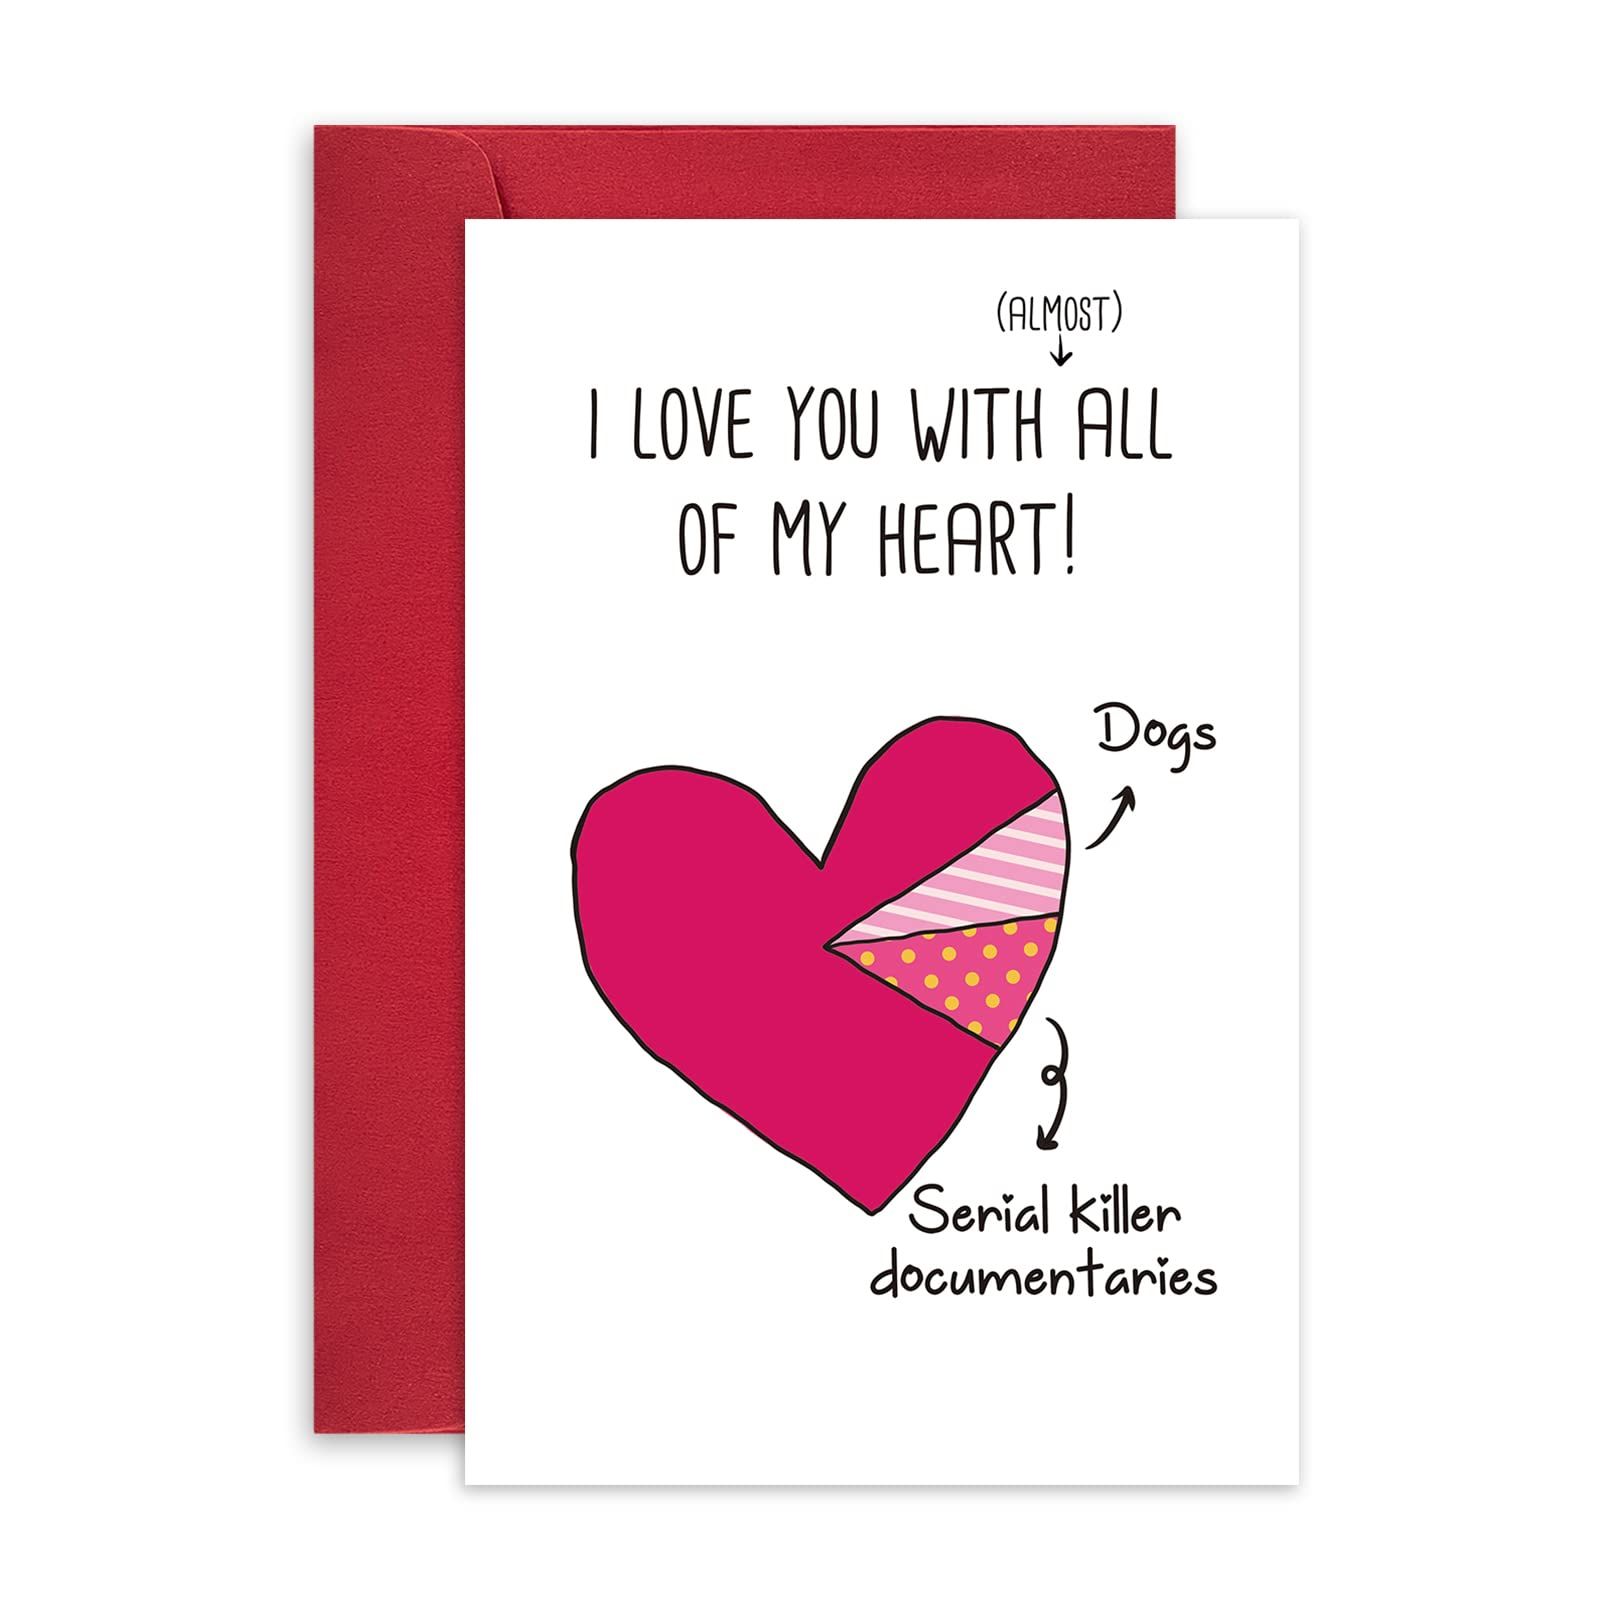 Send a Funny Valentine's Day Card That'll Make Anyone Laugh